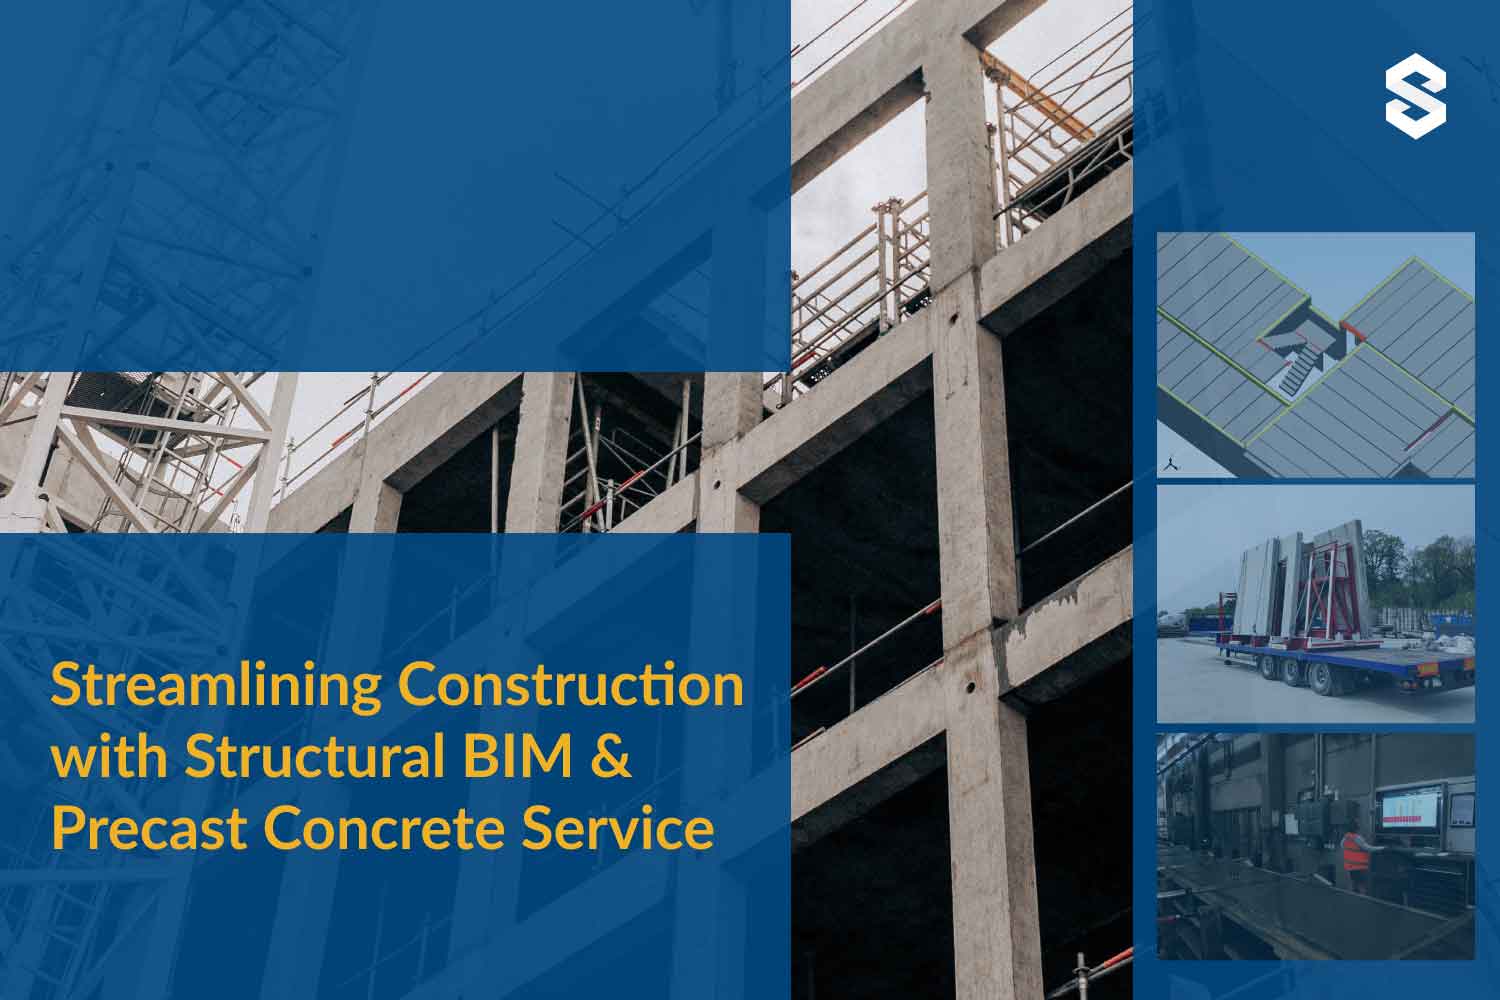 Streamlining Construction with Structural BIM and Precast Concrete Service